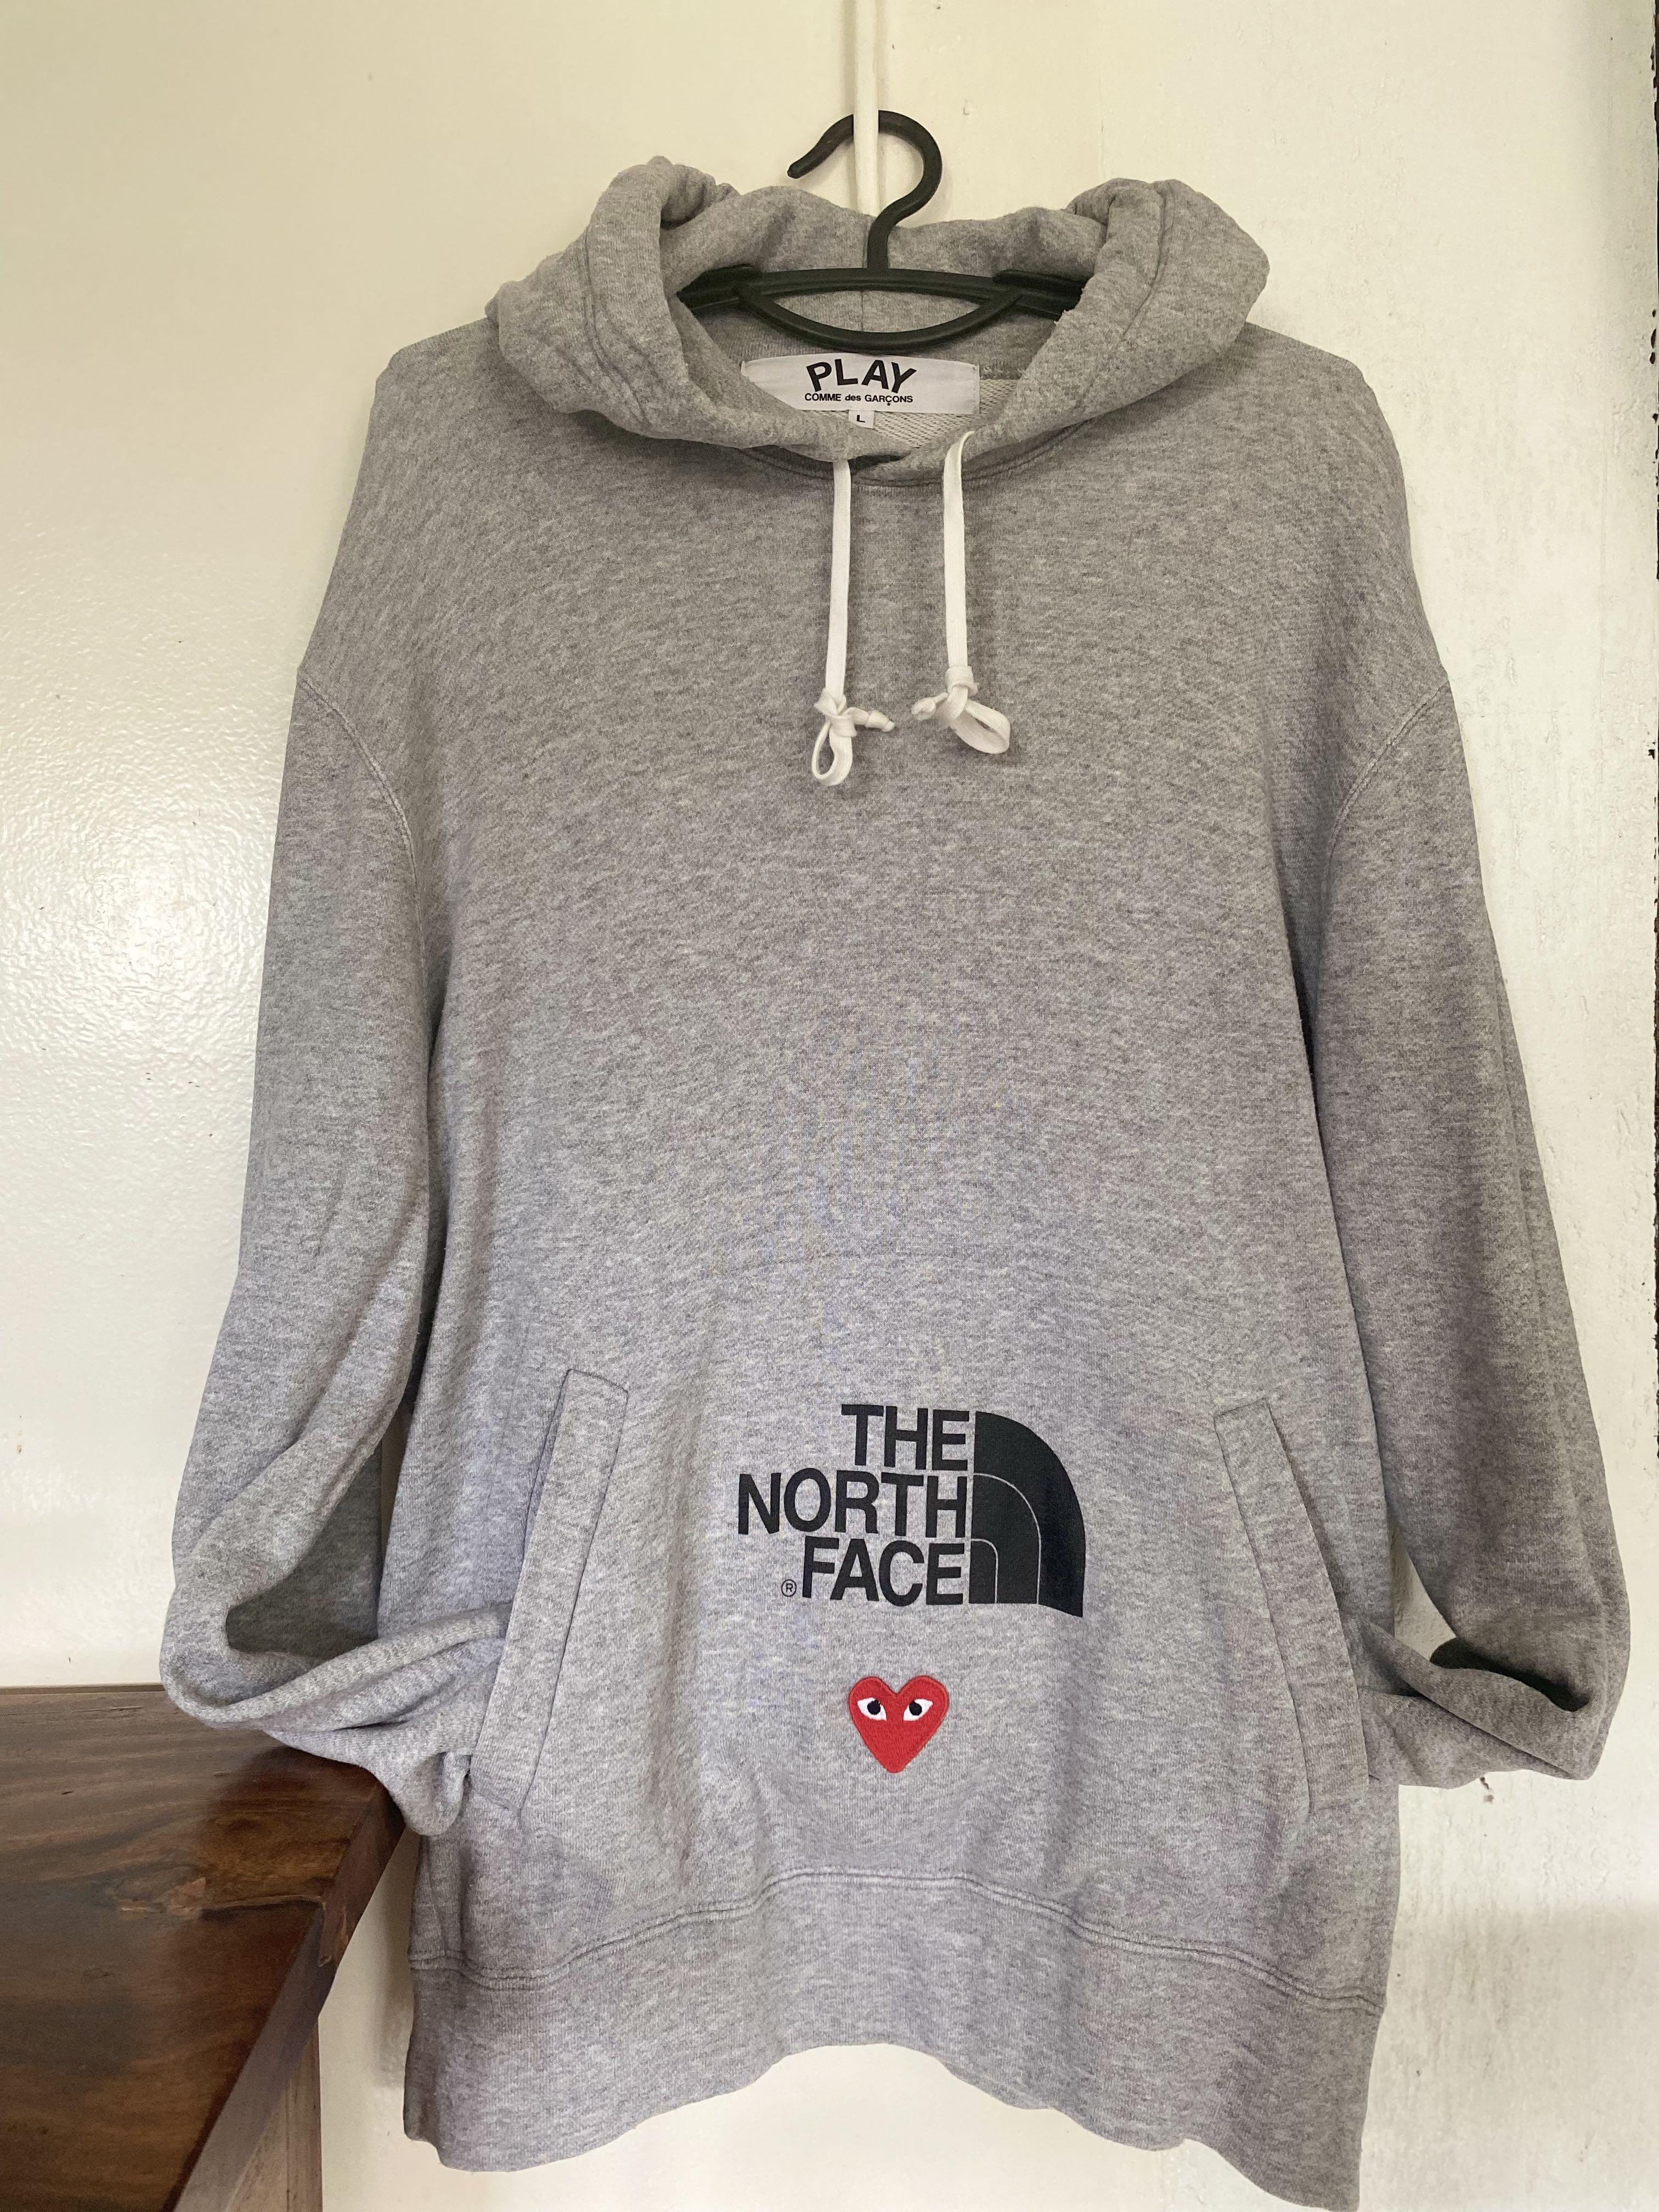 Play CDG x The north face (TNF) hoodie jacket gray, Men's Fashion ...